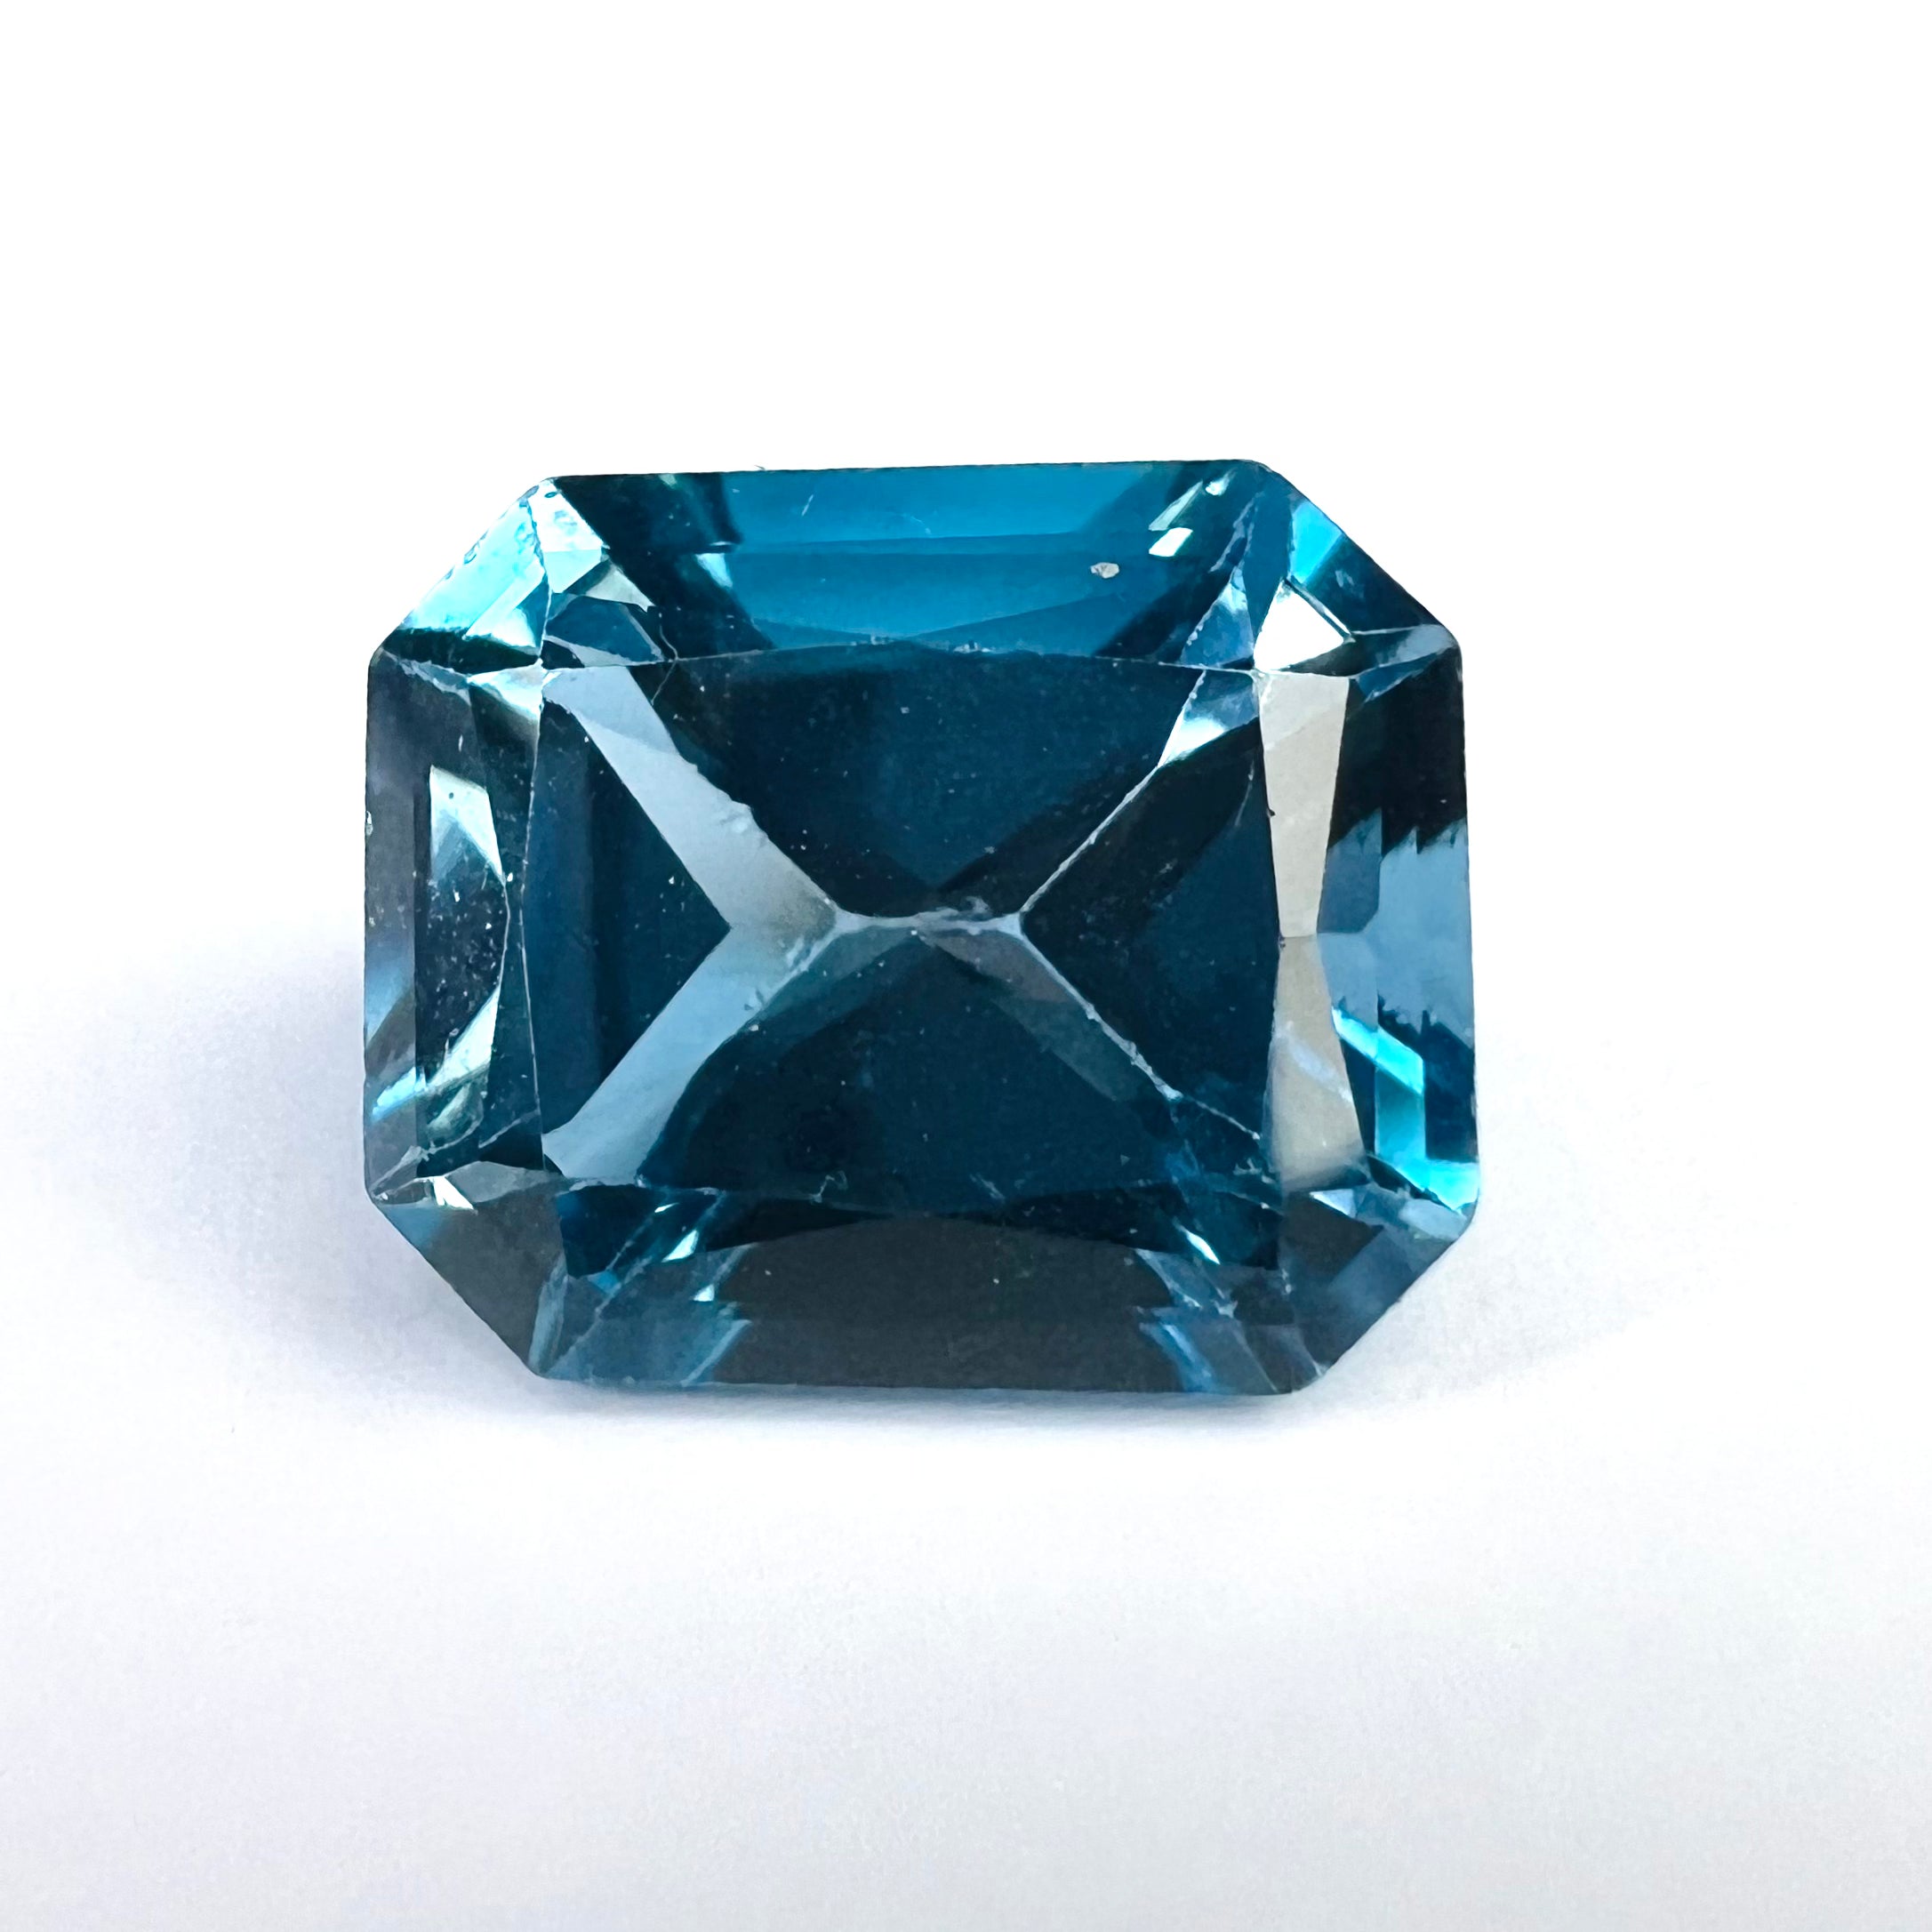 7CTW Loose Natural Octagon Cut Topaz 12x10x7.2mm Earth mined Gemstone